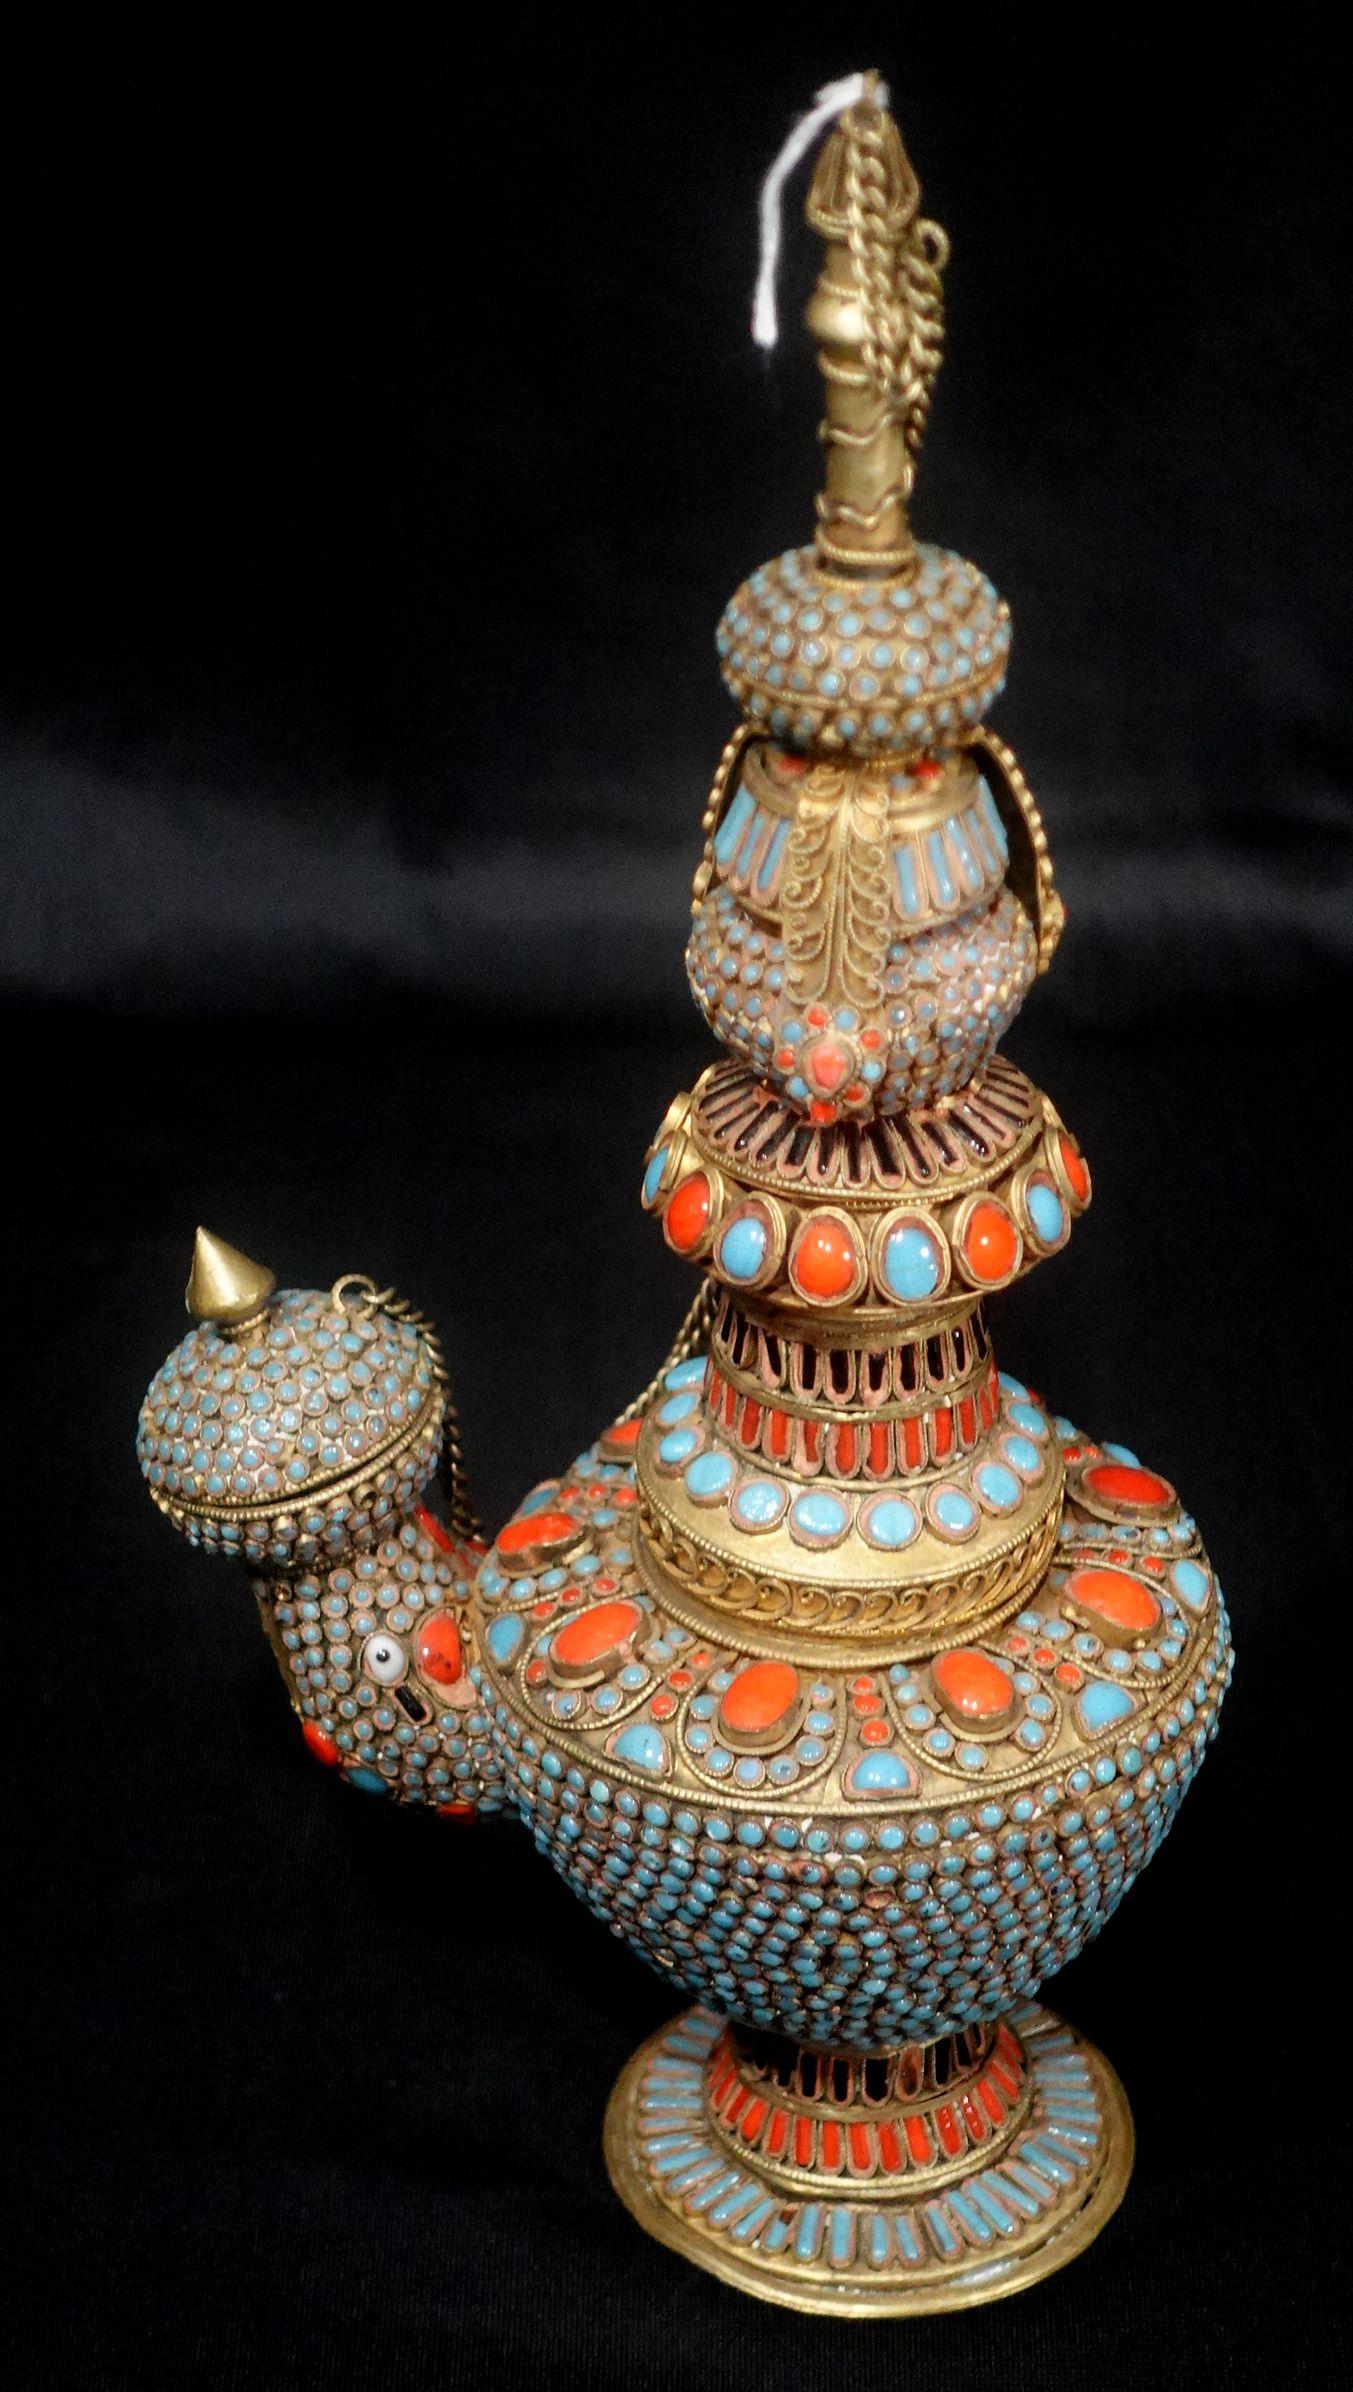 A Tibetan handmade pot with the spout being a head with wire work and mounted jewelry stones overall. It can be disassembled in pieces and put back together again.
12 1/2 inches High.